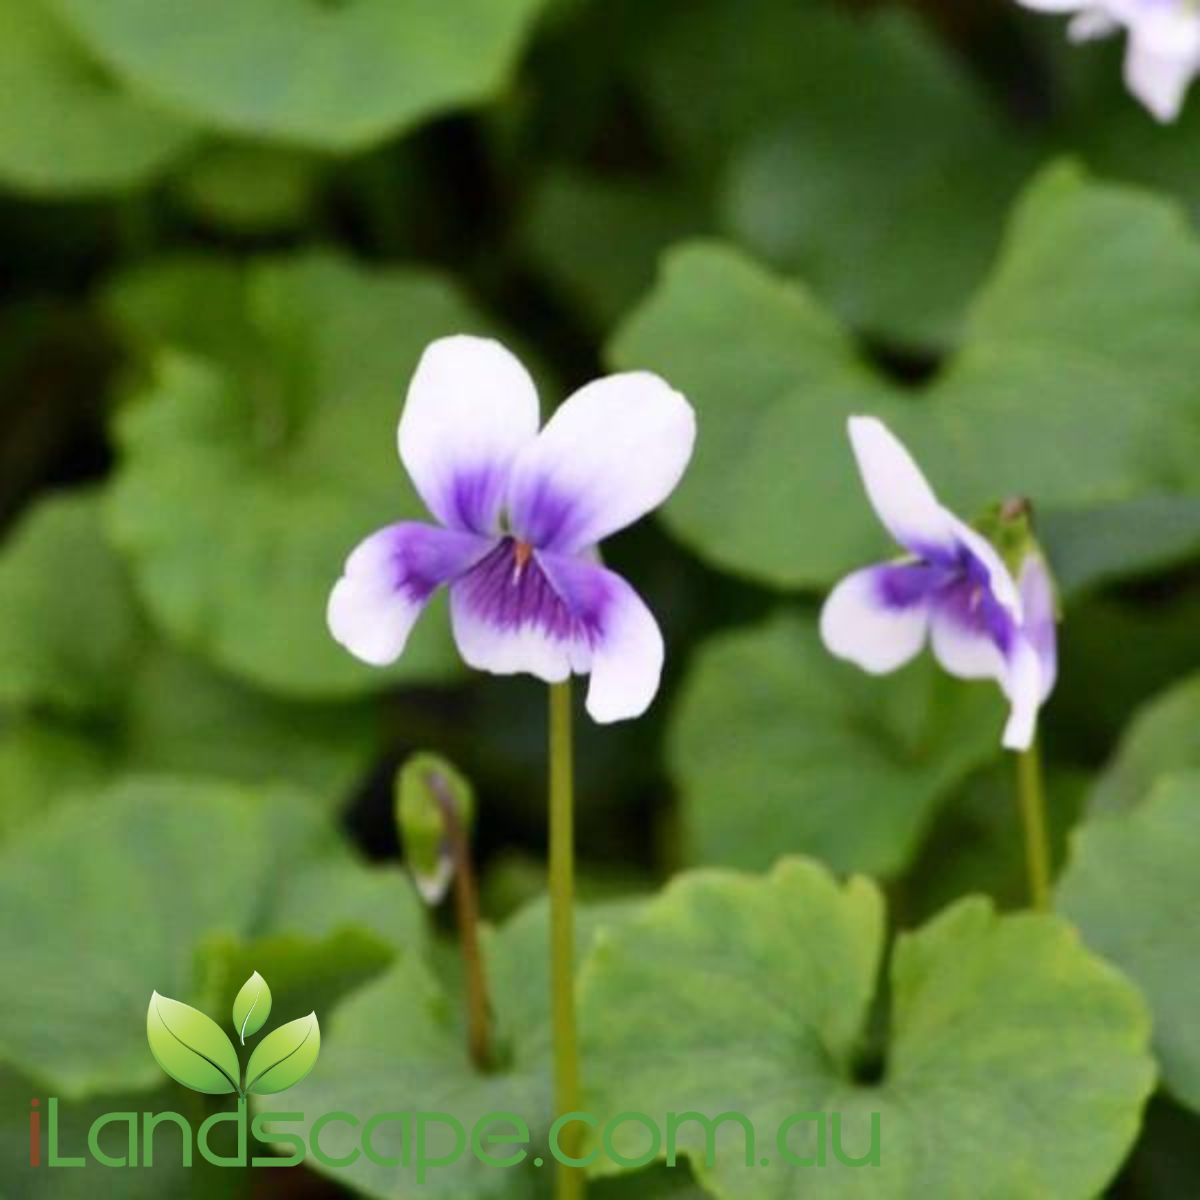 Viola Hederacea also known as Native Violet is an excellent ground cover that prefers shade to part shade environments. With round leaves and purple to white flowers its great to grow in Pots, grounds or Hanging baskets 